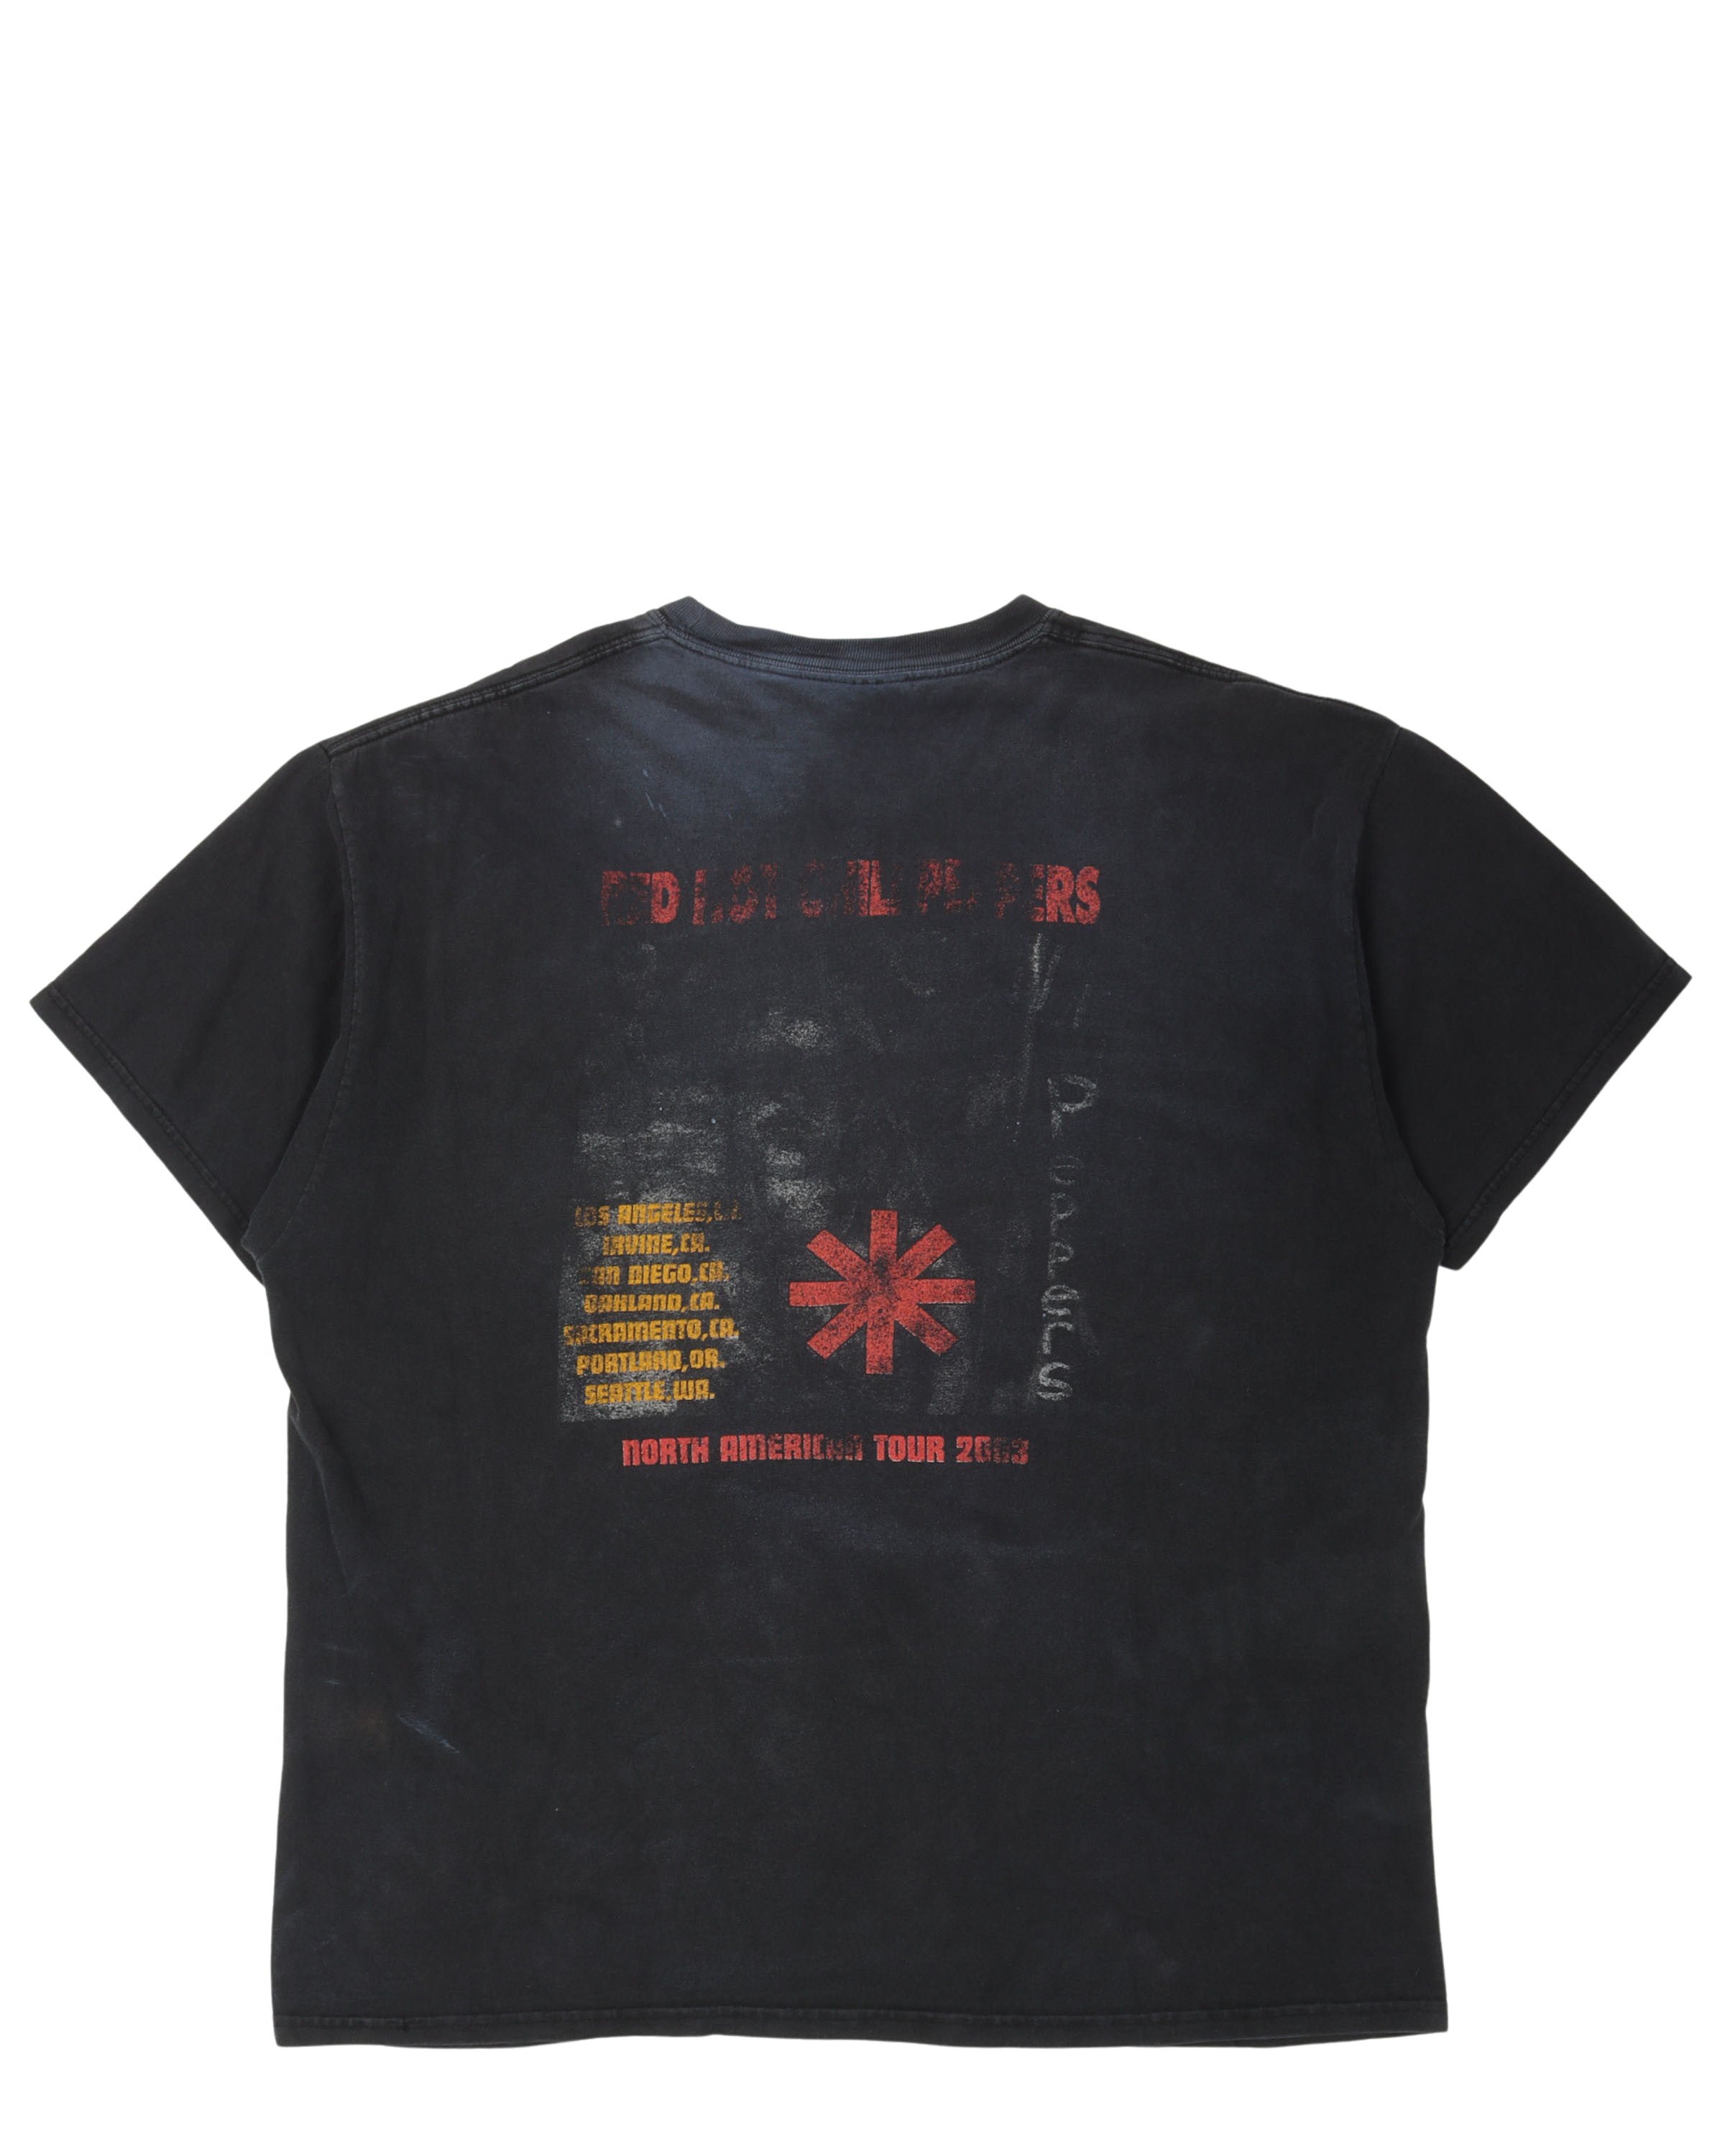 Red Hot Chili Peppers 2003 Tour T-Shirt